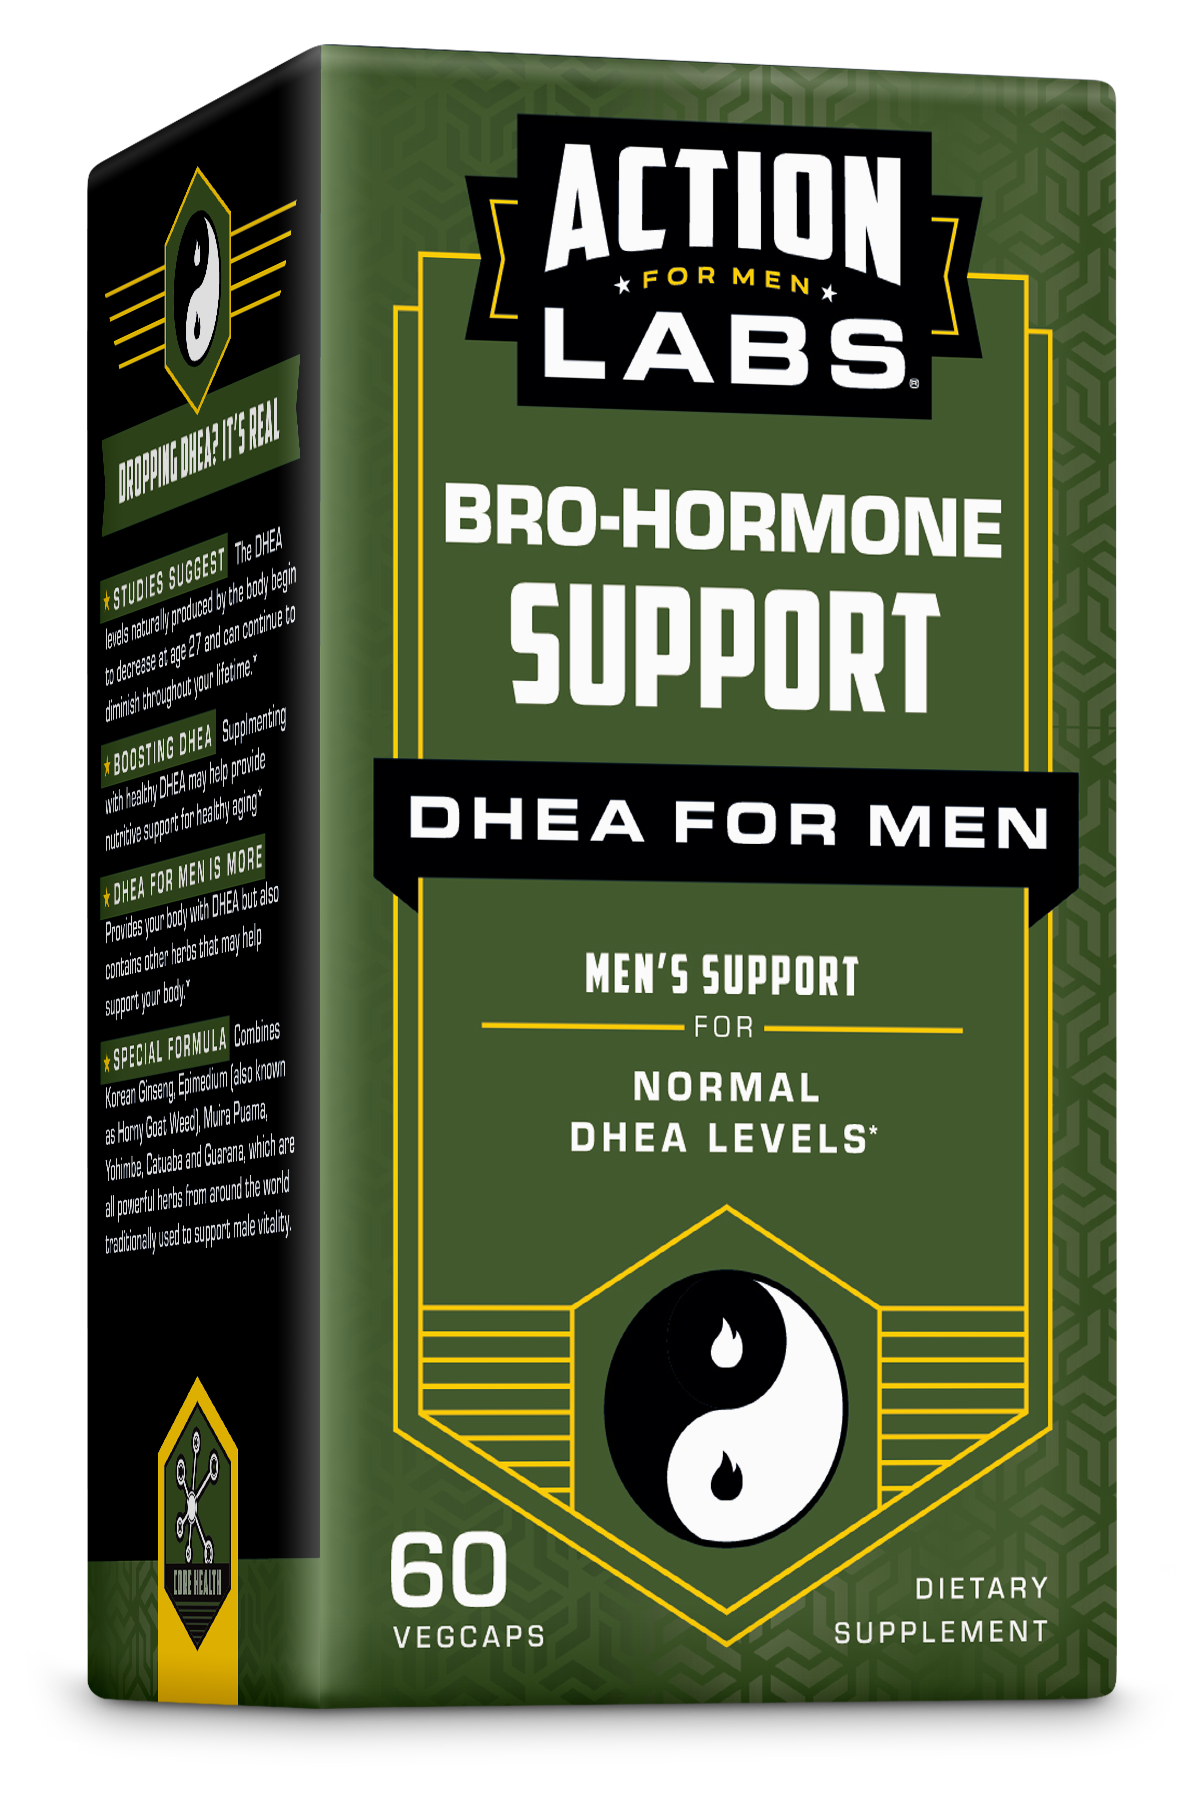 DHEA for Men | Bro-Hormone Support